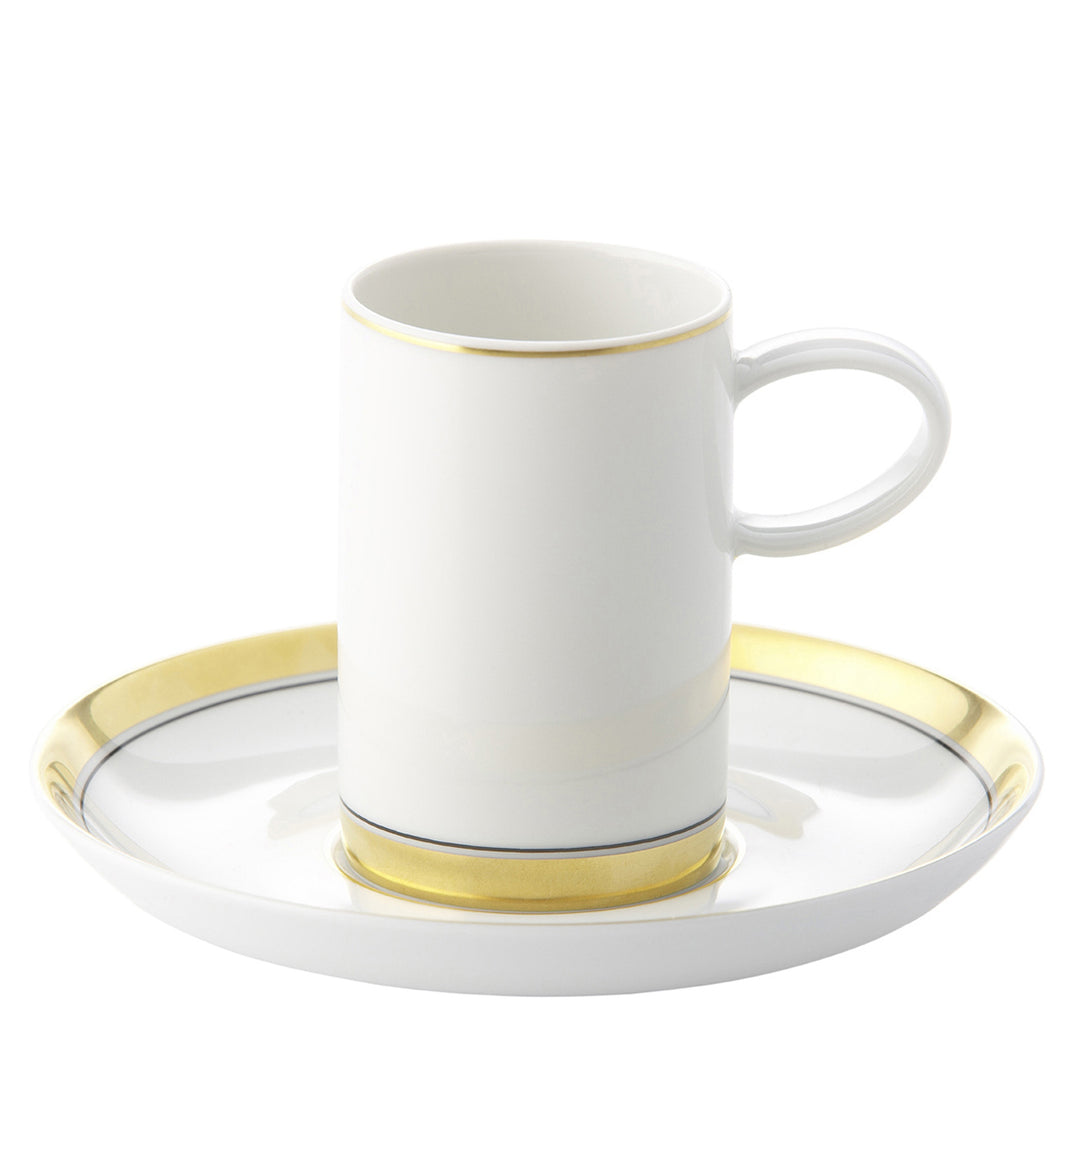 Domo Gold - COFFEE CUP & SAUCER SET OF 4